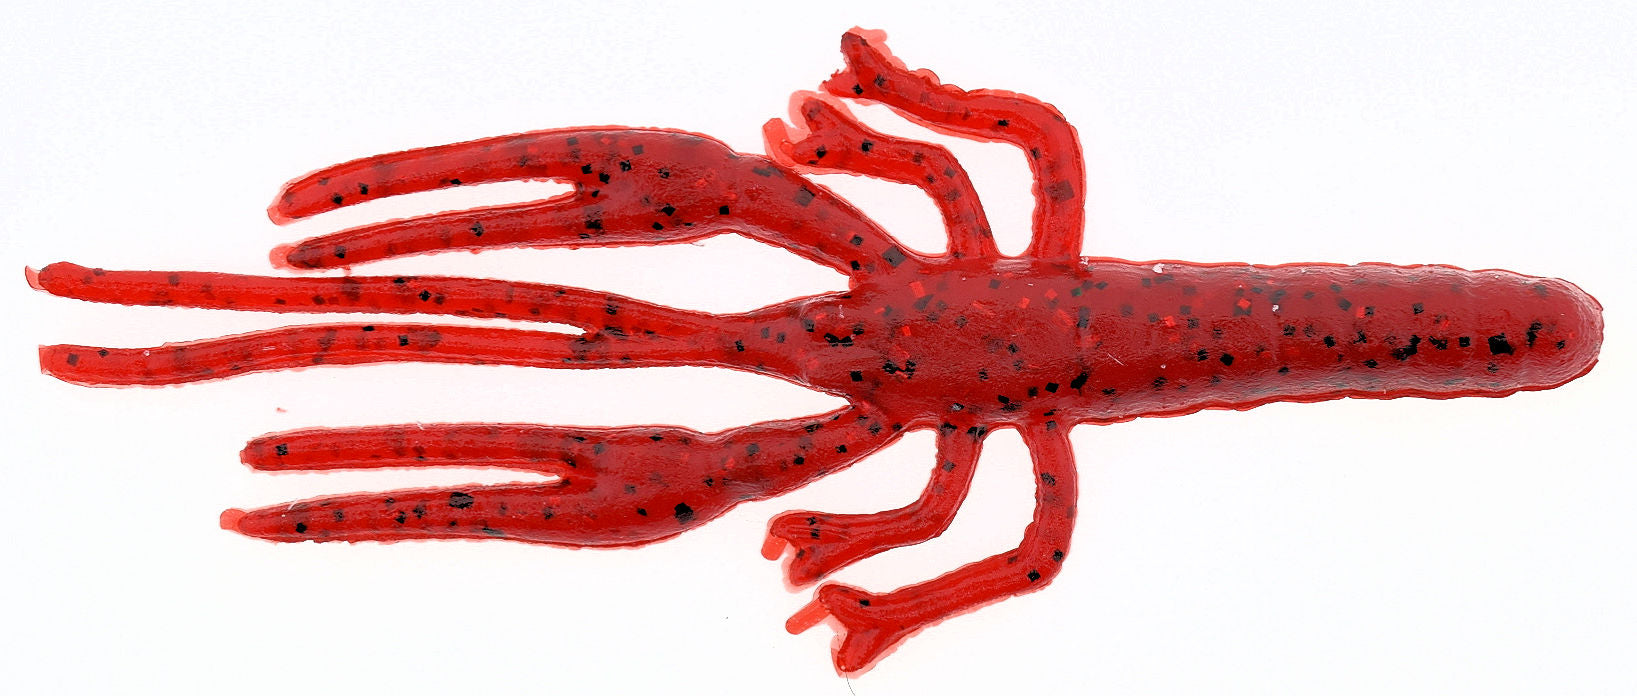 Big Critter Craw_Ruby Red